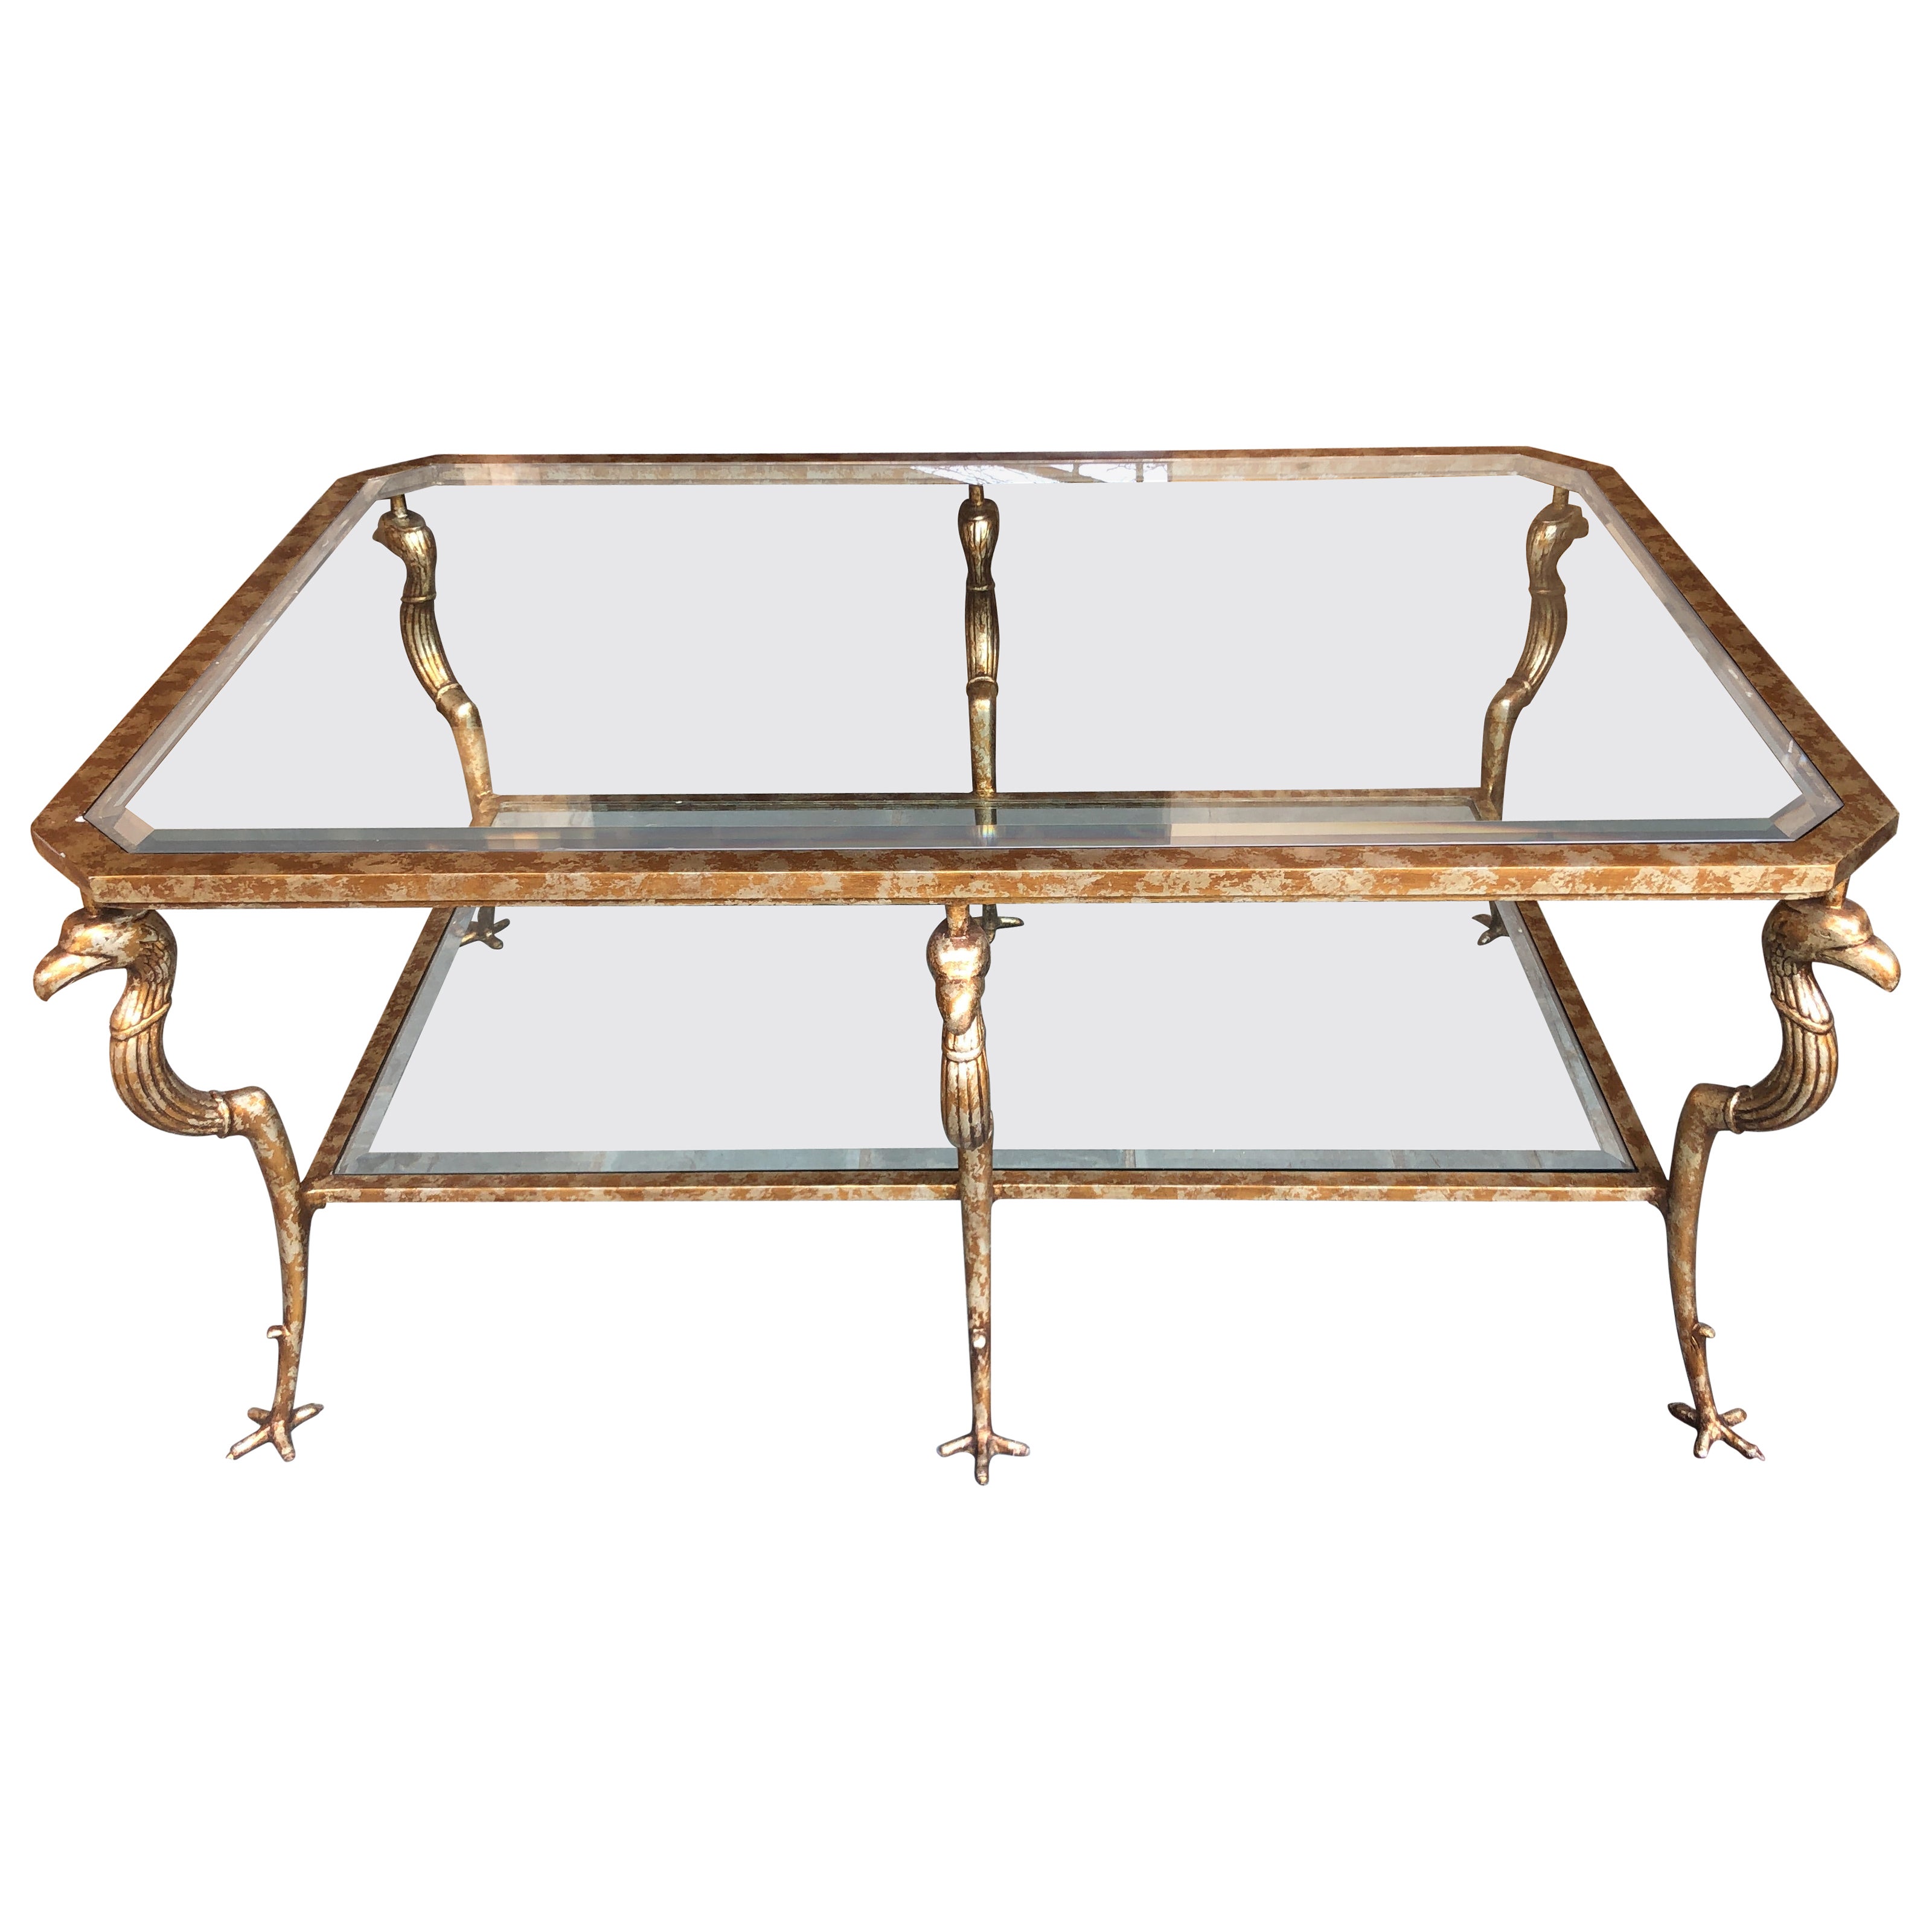 Magnificent Marge Carson Large Gold Griffon Leg Regency Glass Top Coffee Table For Sale